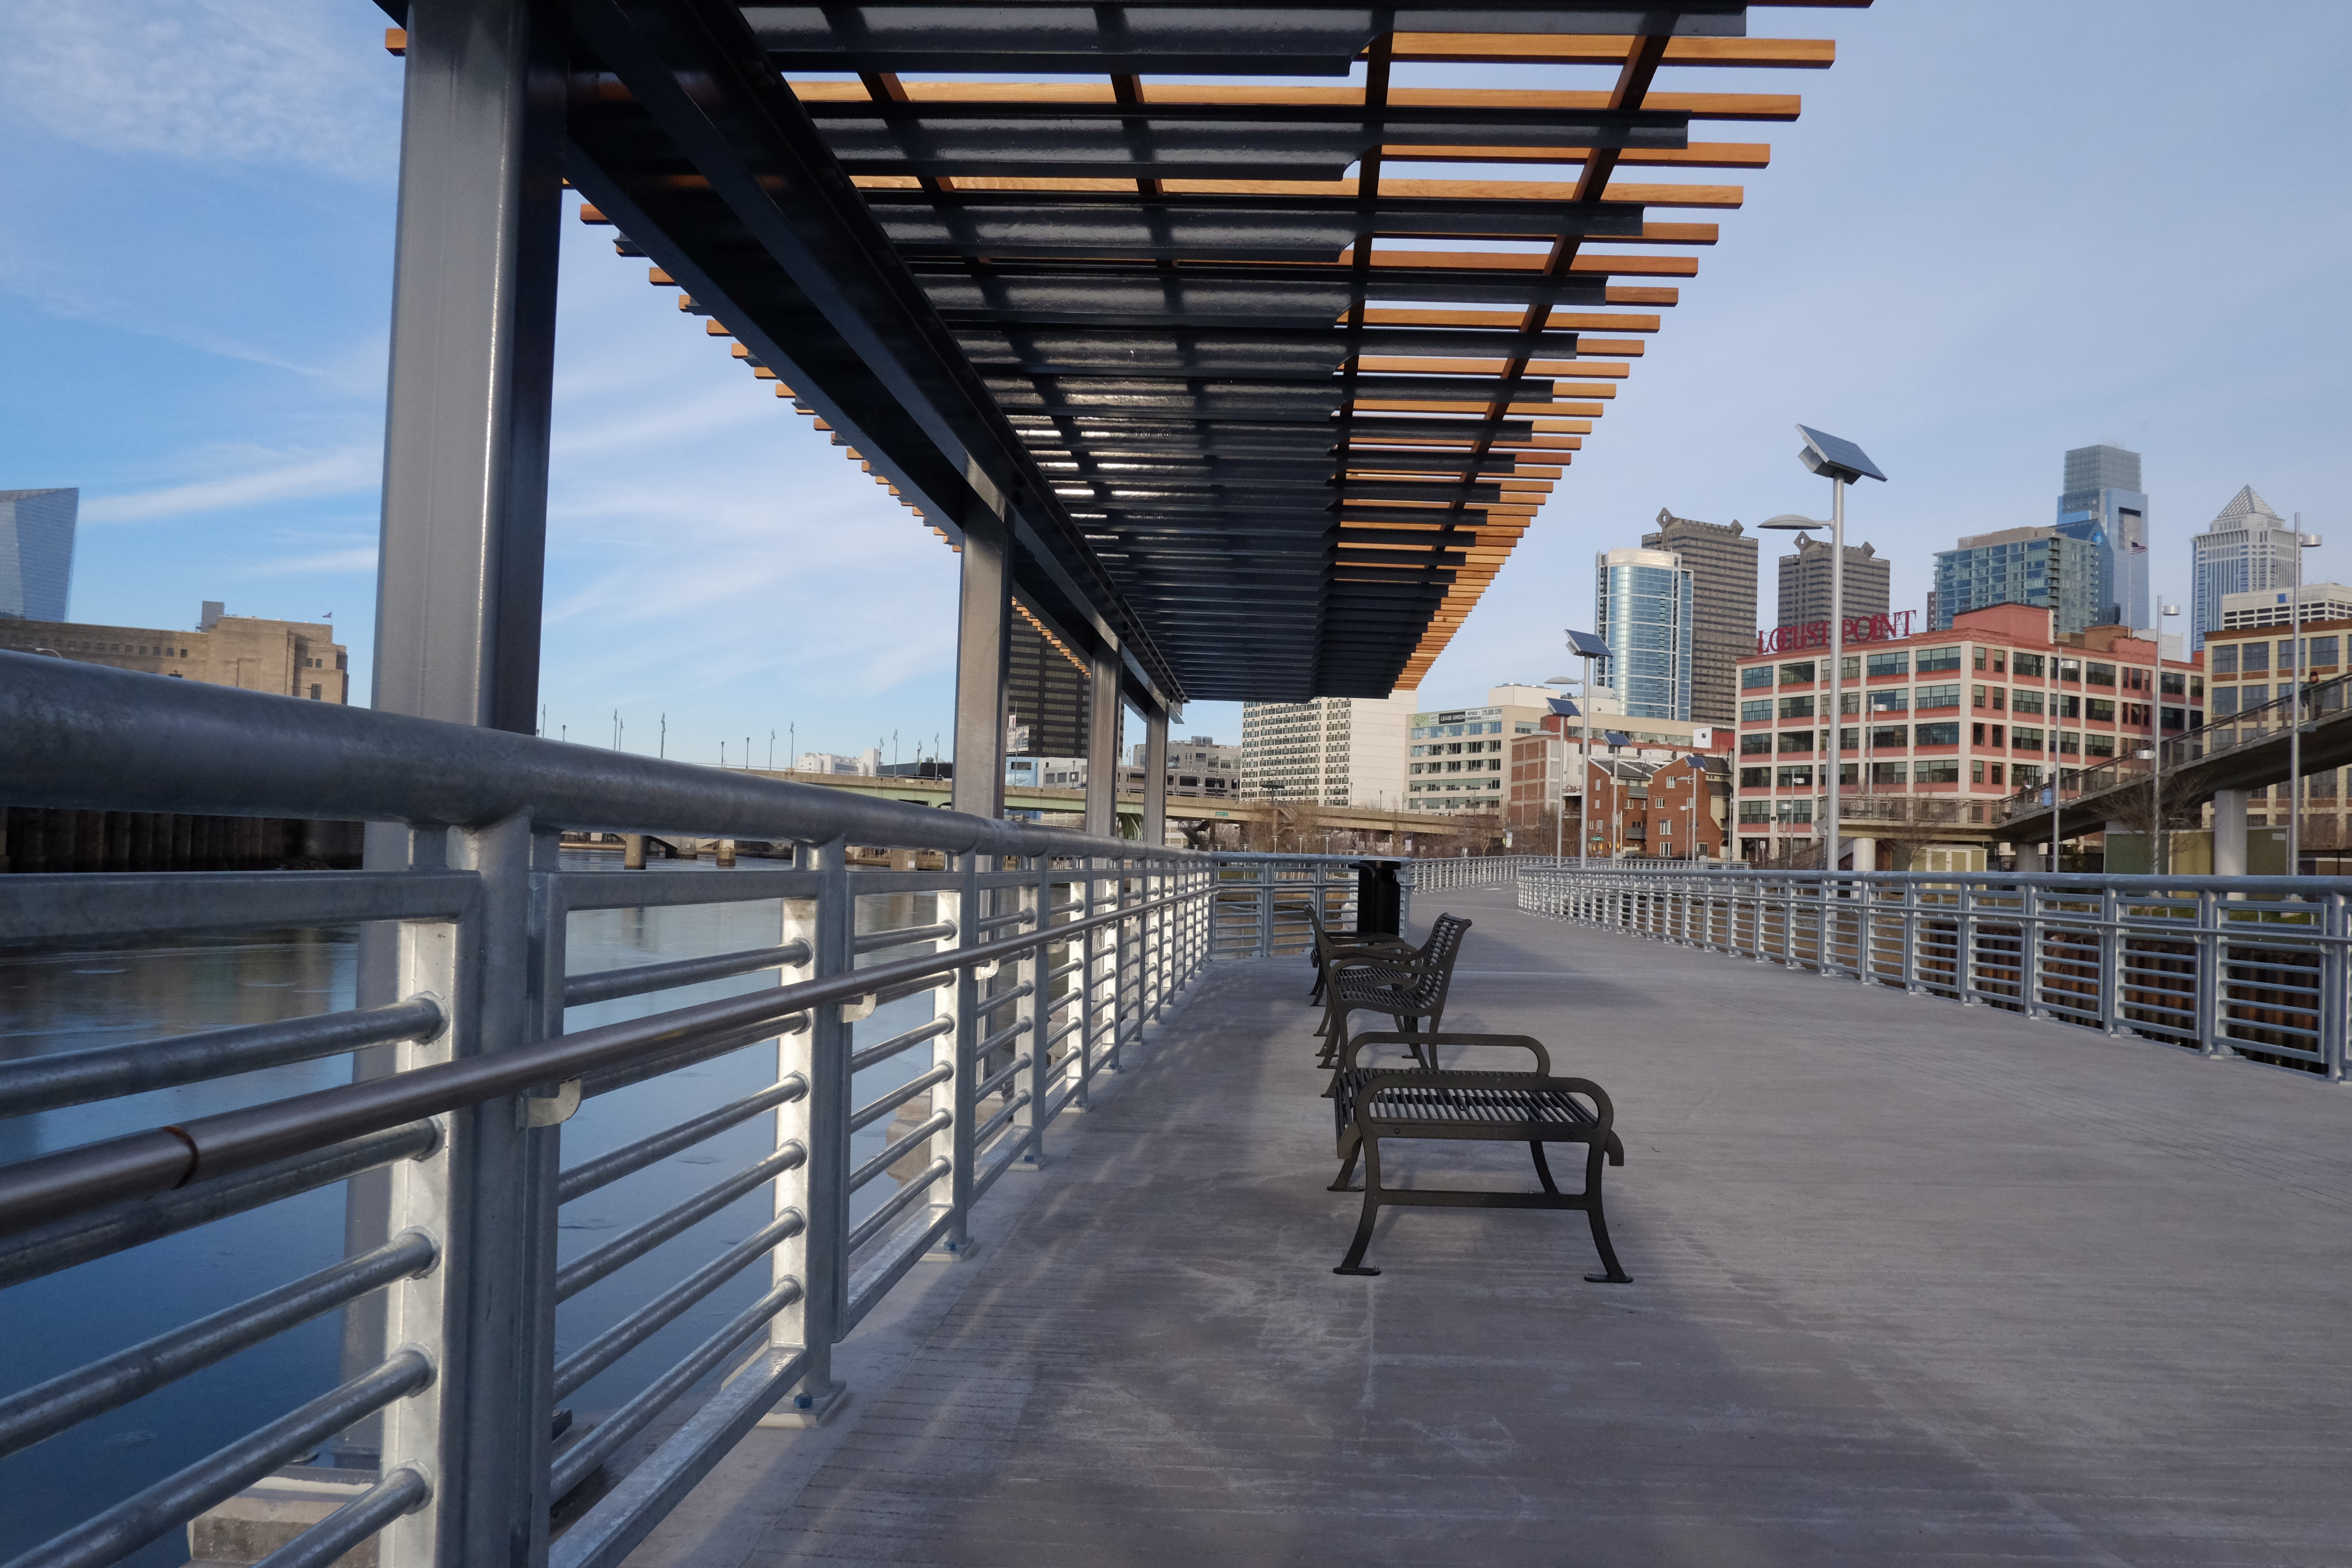 Lots of lines, purlins and rails. Schuylkill Banks Boardwalk, January 2014